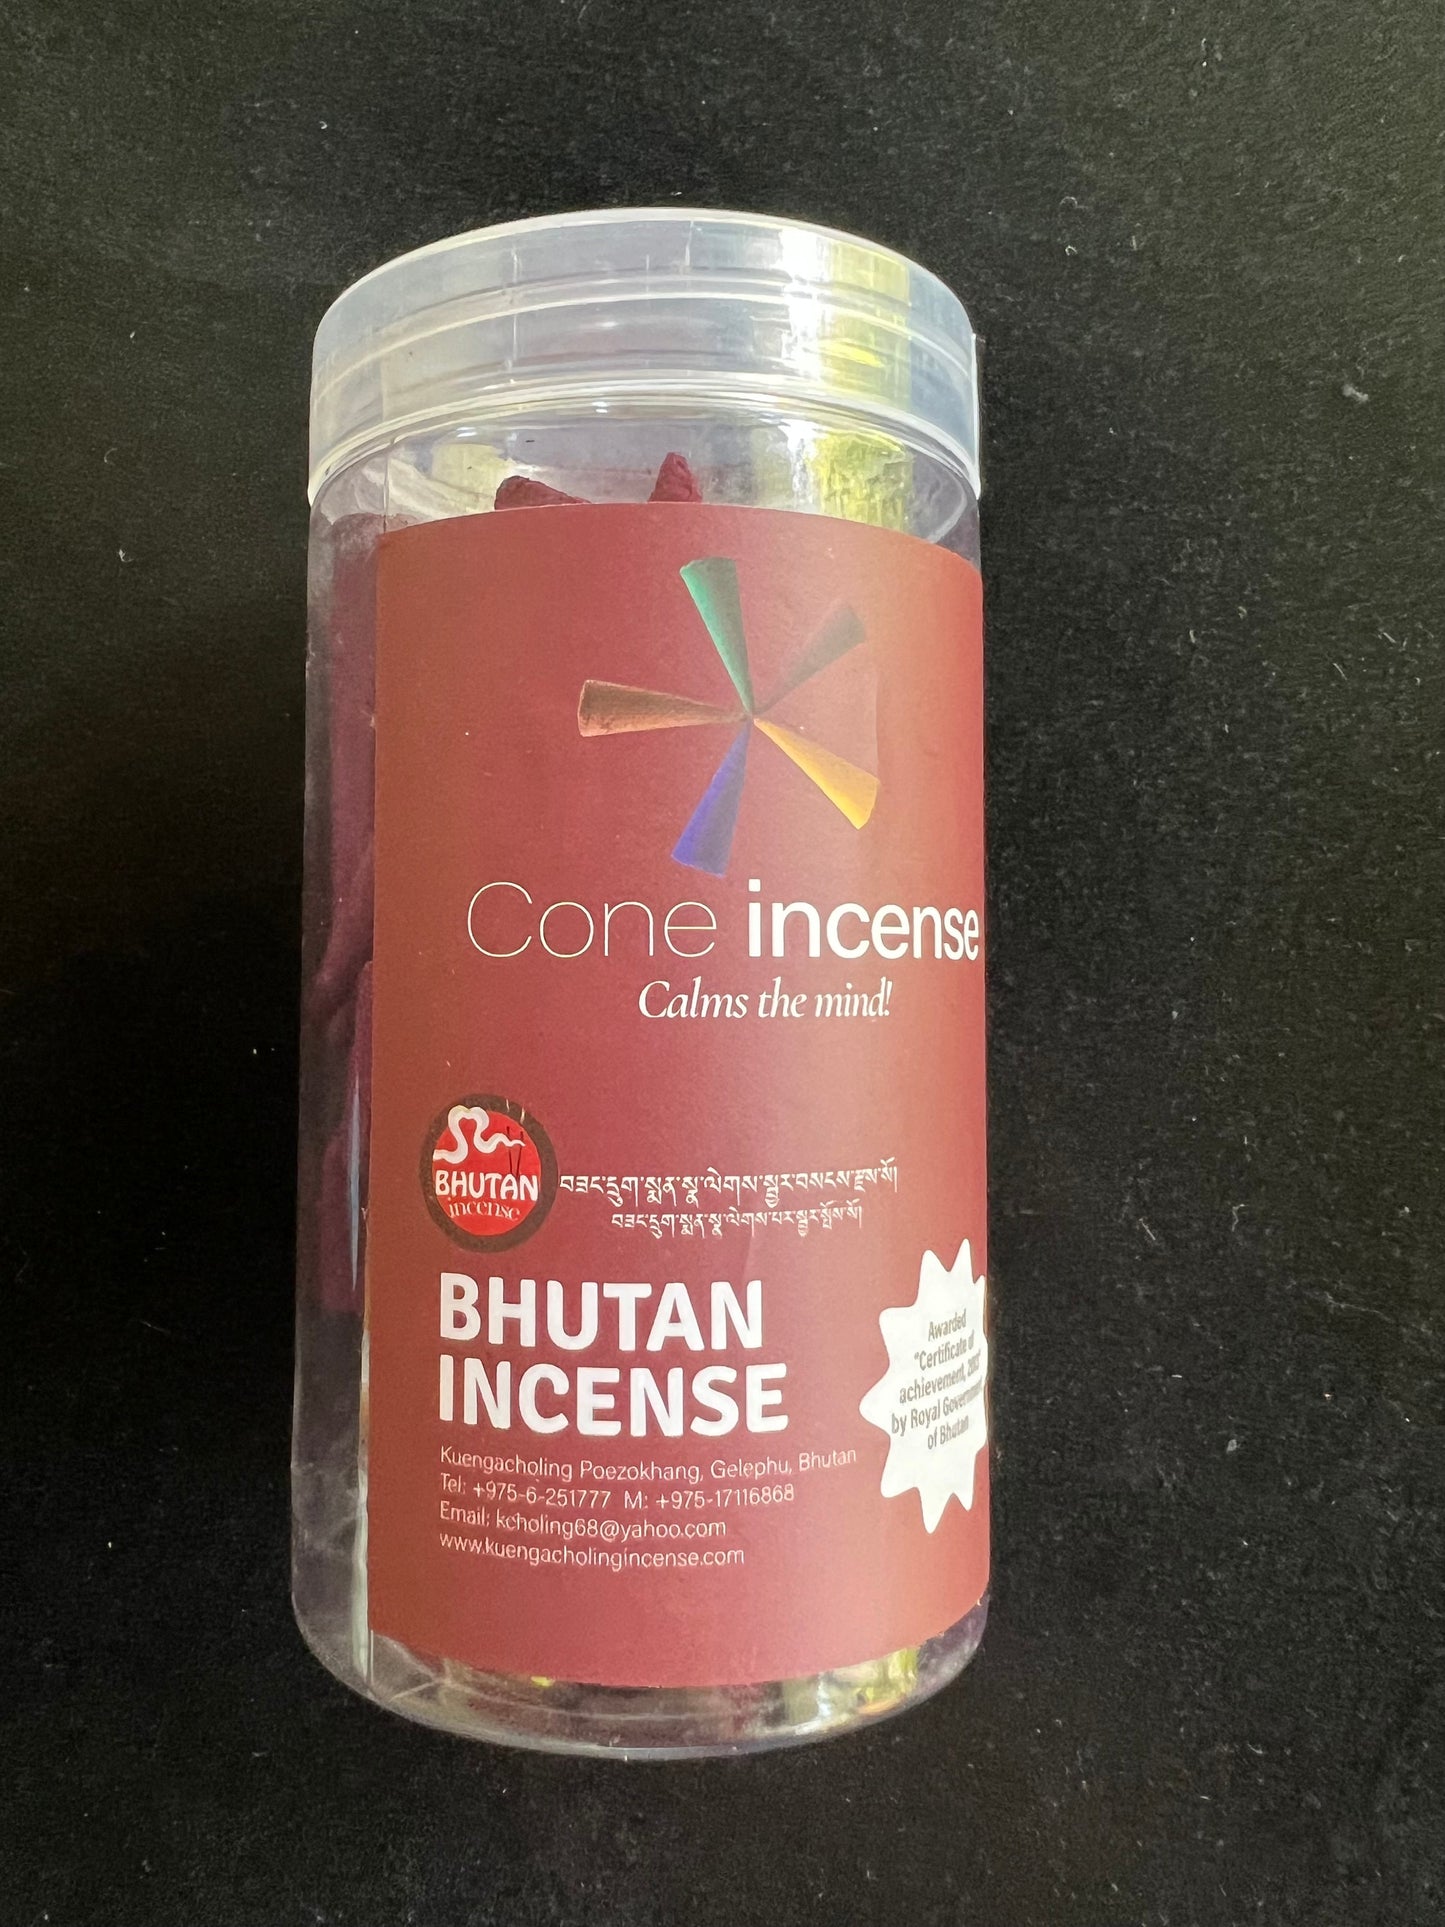 Red (Cheju) Cone Incense | Bhutanese Incense | 20 cones | 2in high cones | ceramic burner included | Kuengacholing